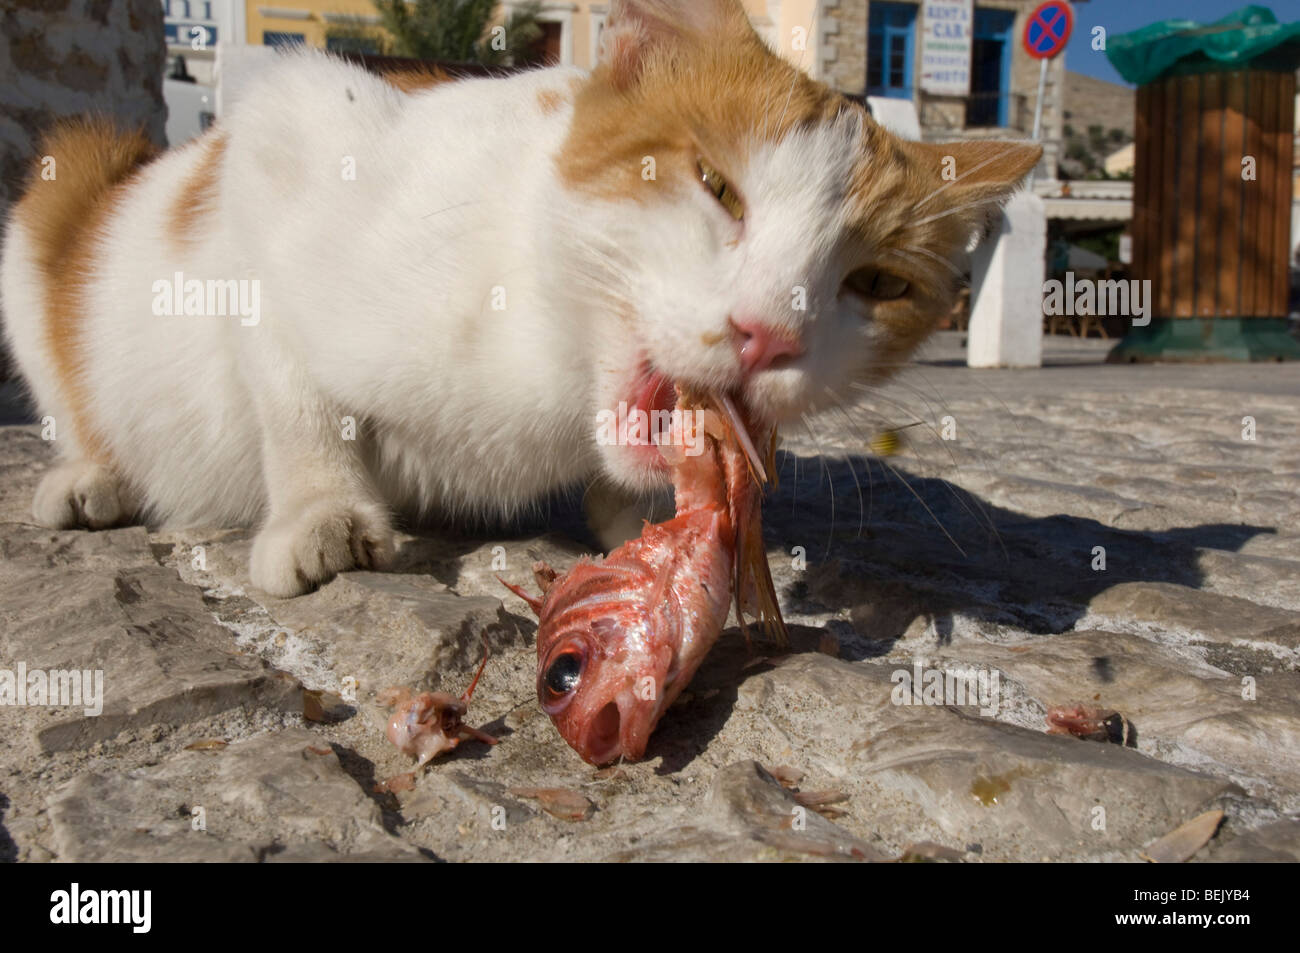 Stray cat eating a fish on a quayside in Greece Stock Photo